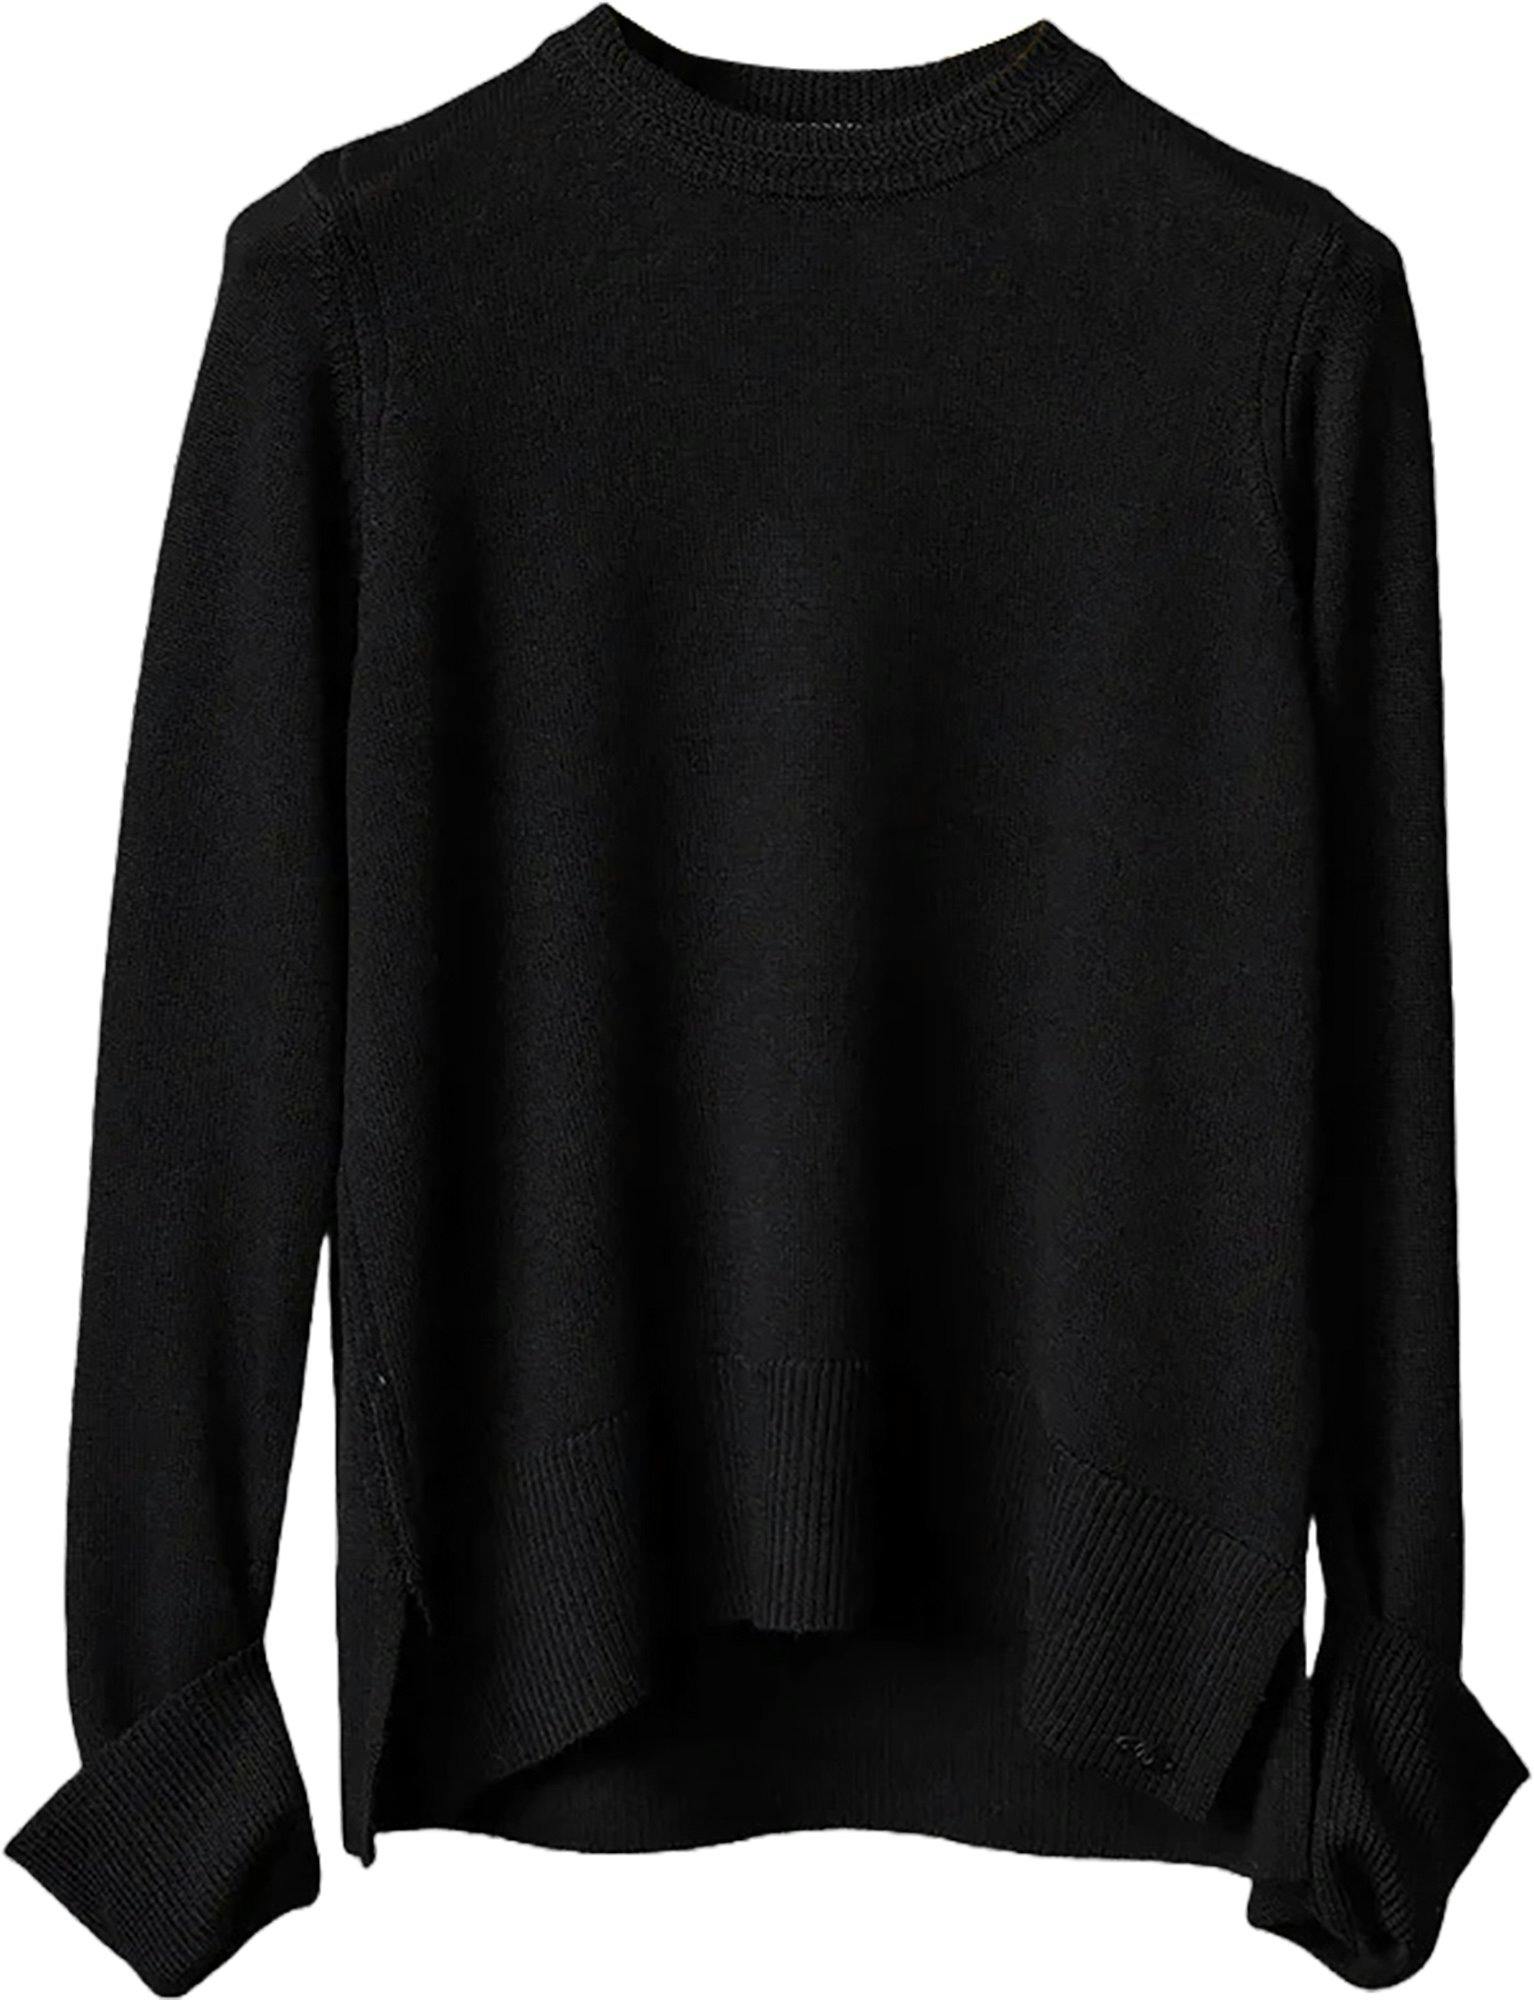 Product image for 7Gg Merino Cuff Knit Sweater - Men's